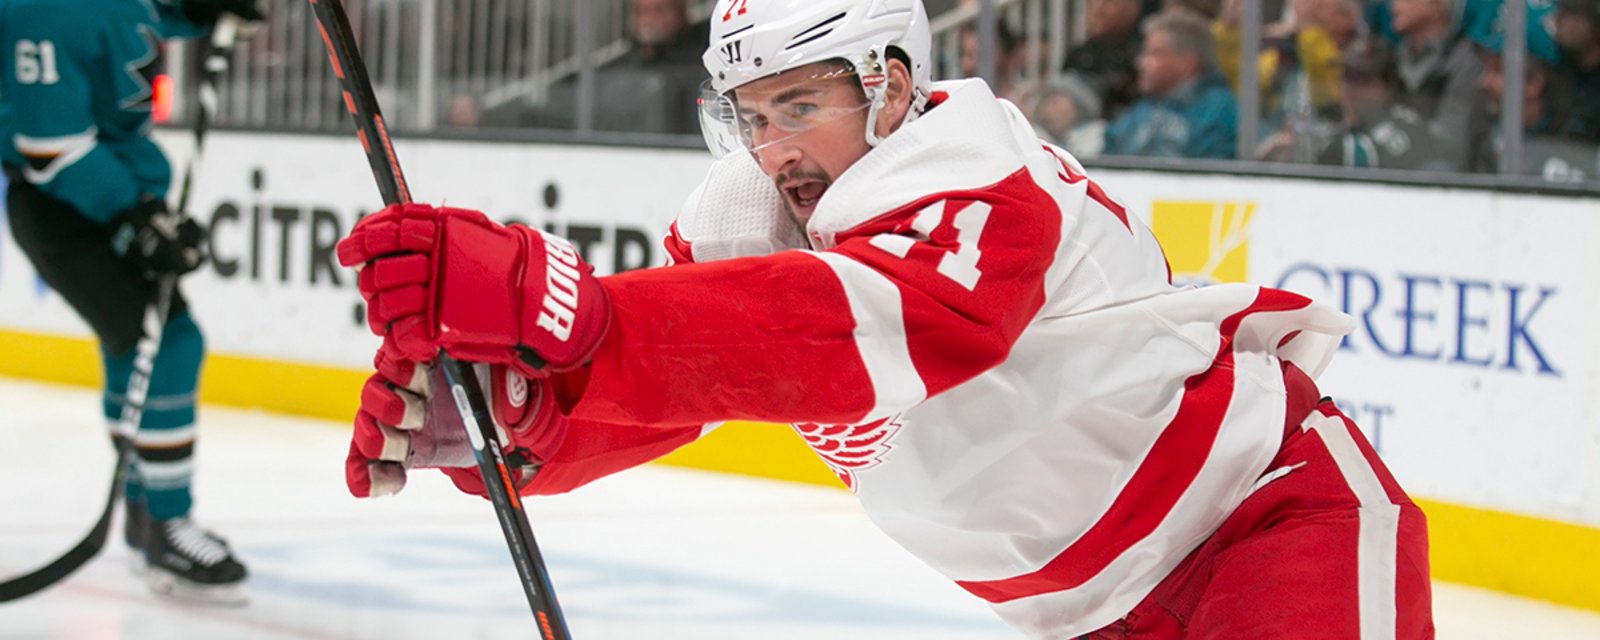 Video: The top 10 Dylan Larkin plays from 2018-19